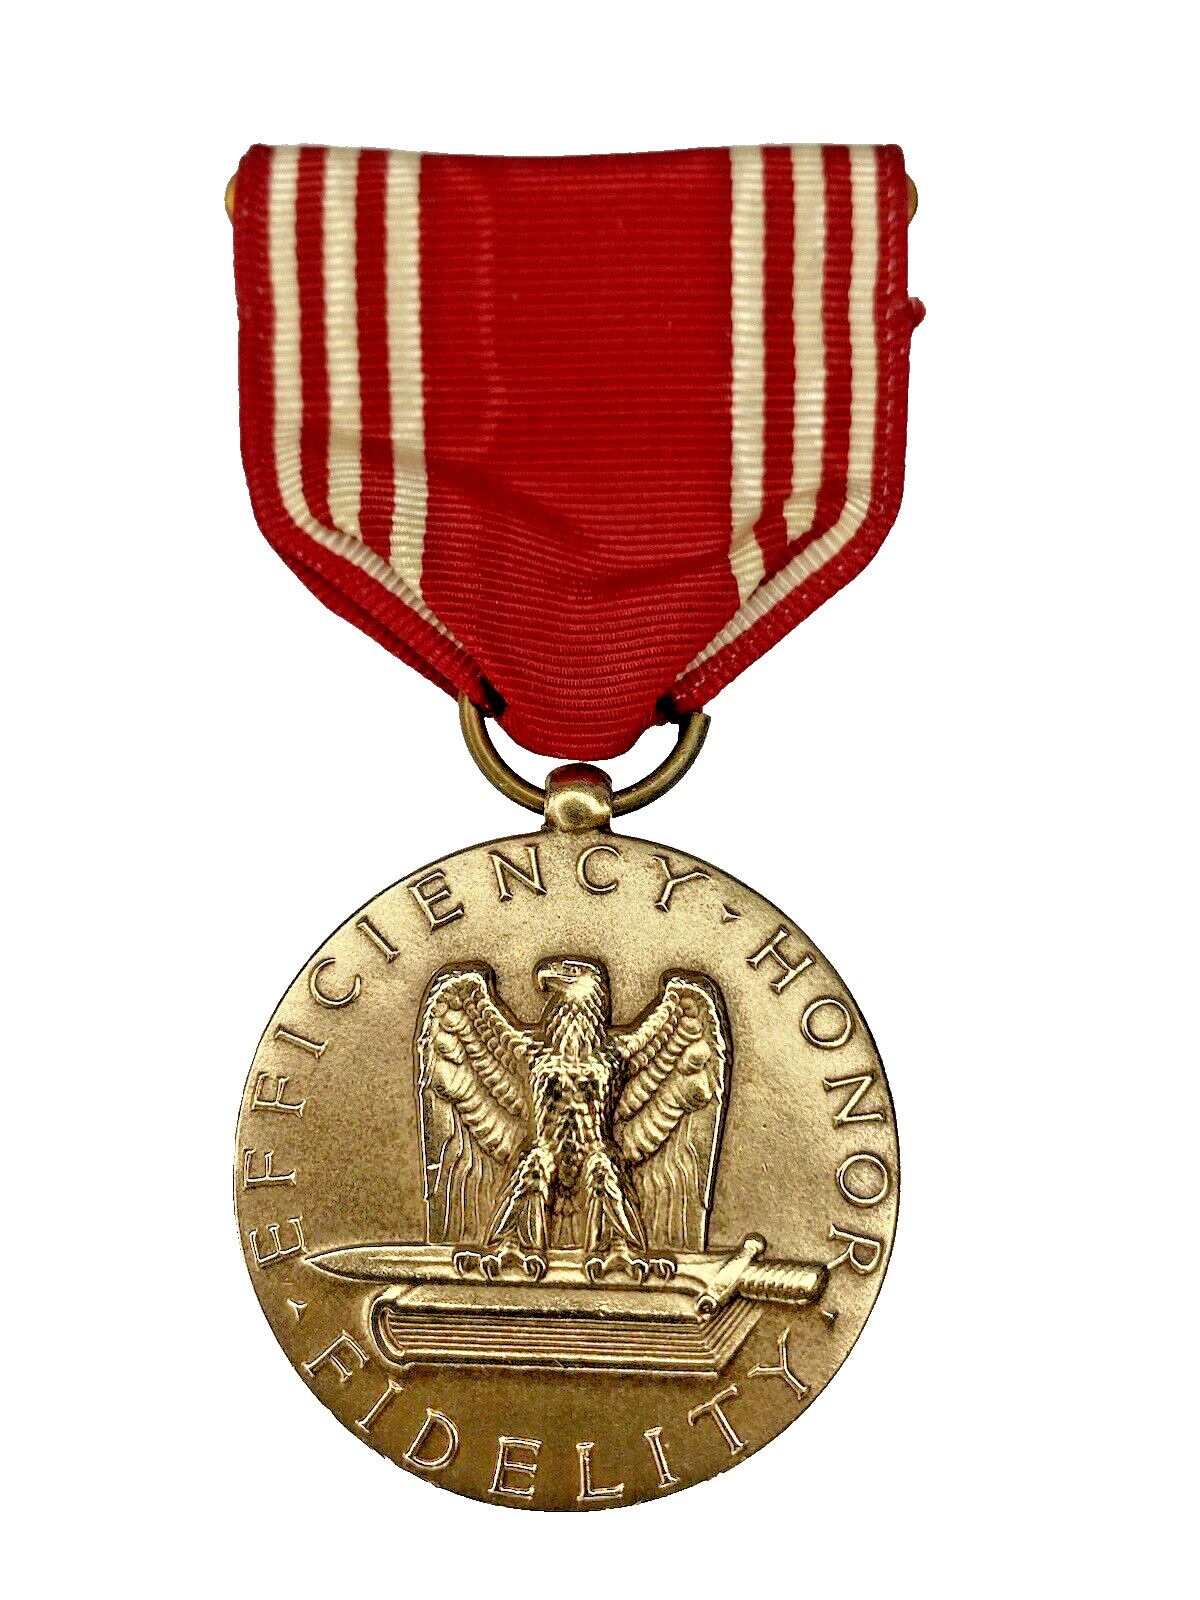 WWII US Good Conduct Medal with Red- Striped Ribbon 32mm Bronze 2- sided